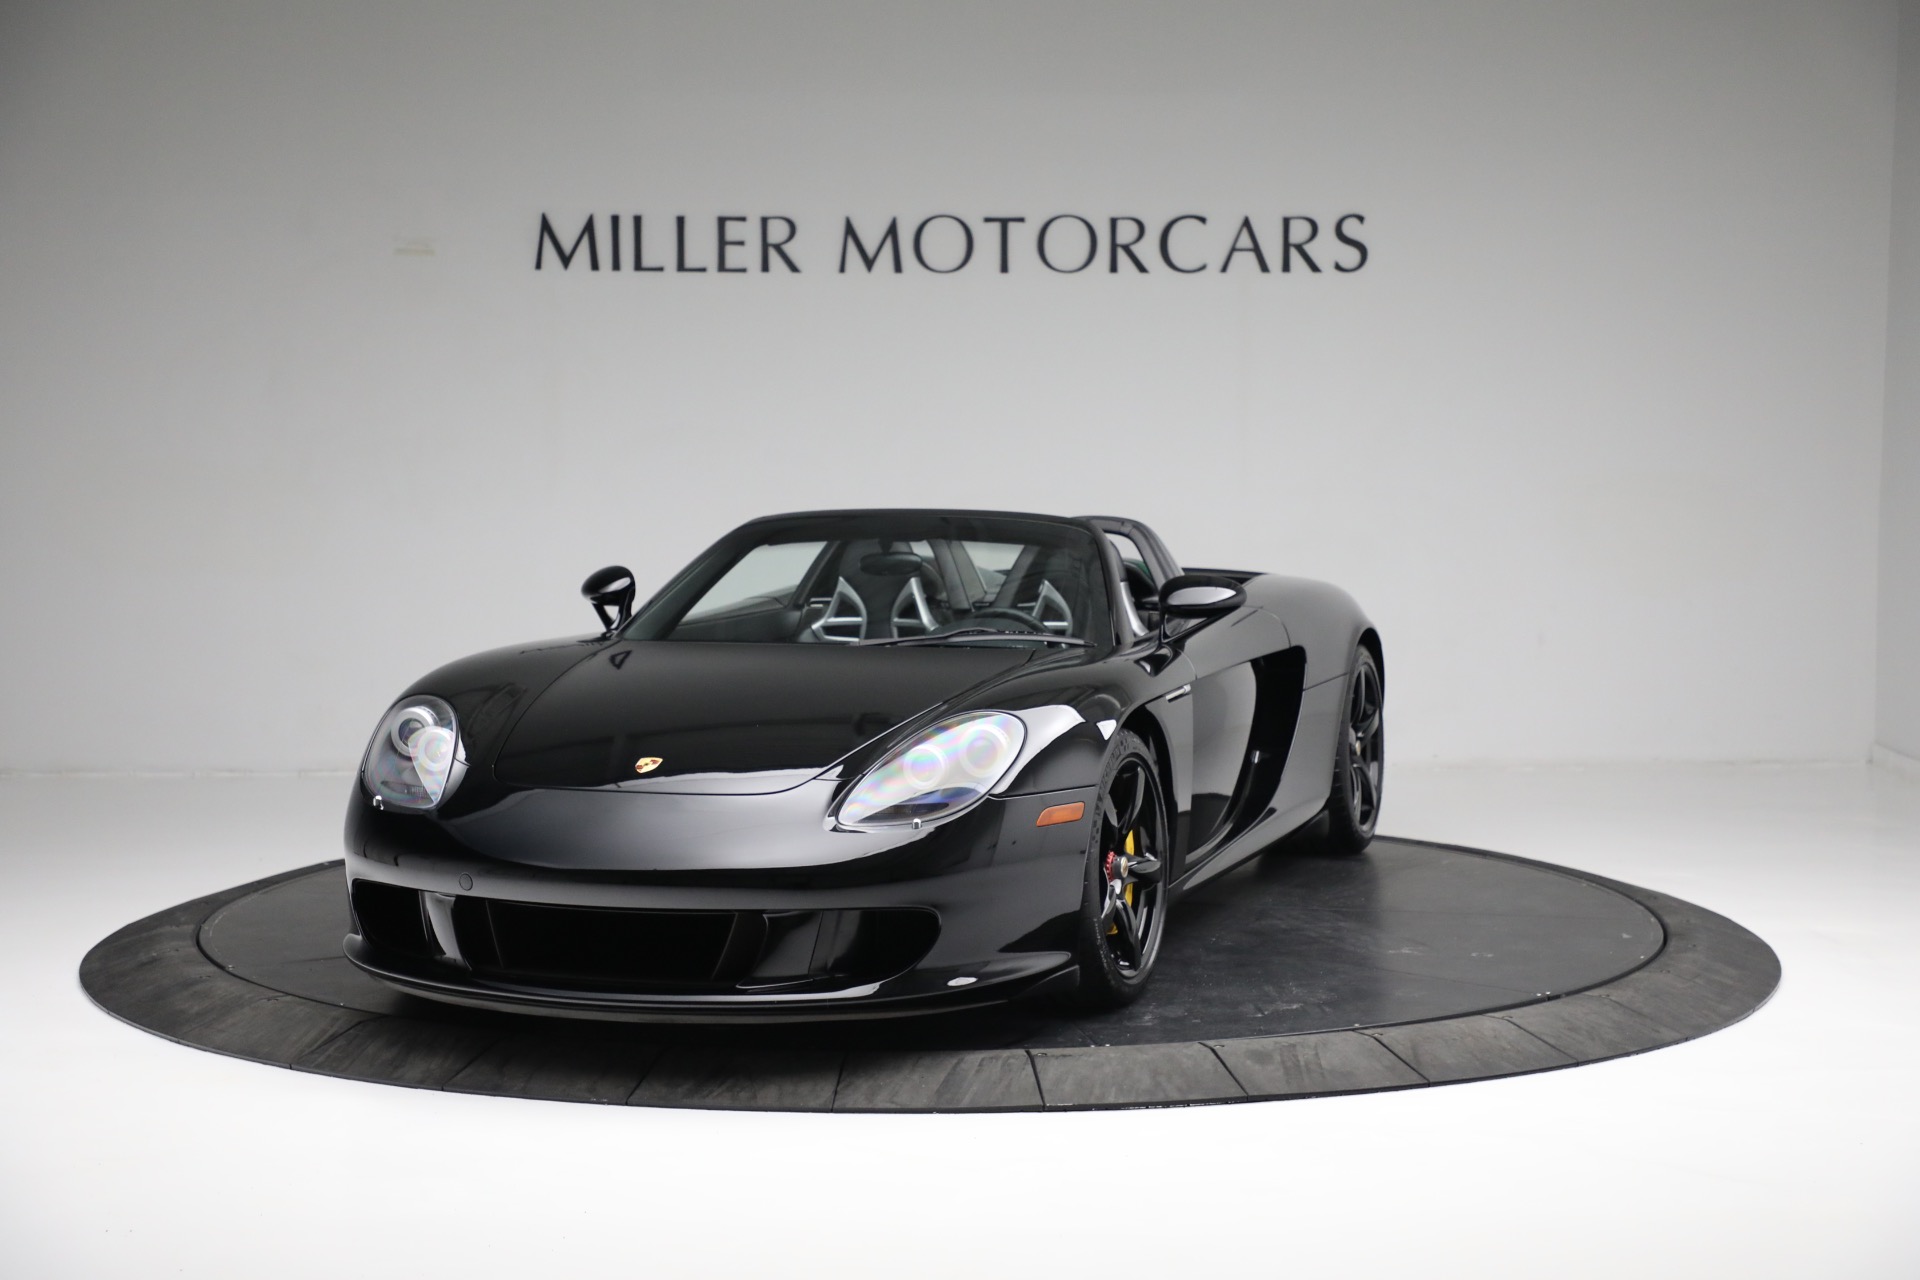 Used 2005 Porsche Carrera GT for sale $1,550,000 at Aston Martin of Greenwich in Greenwich CT 06830 1